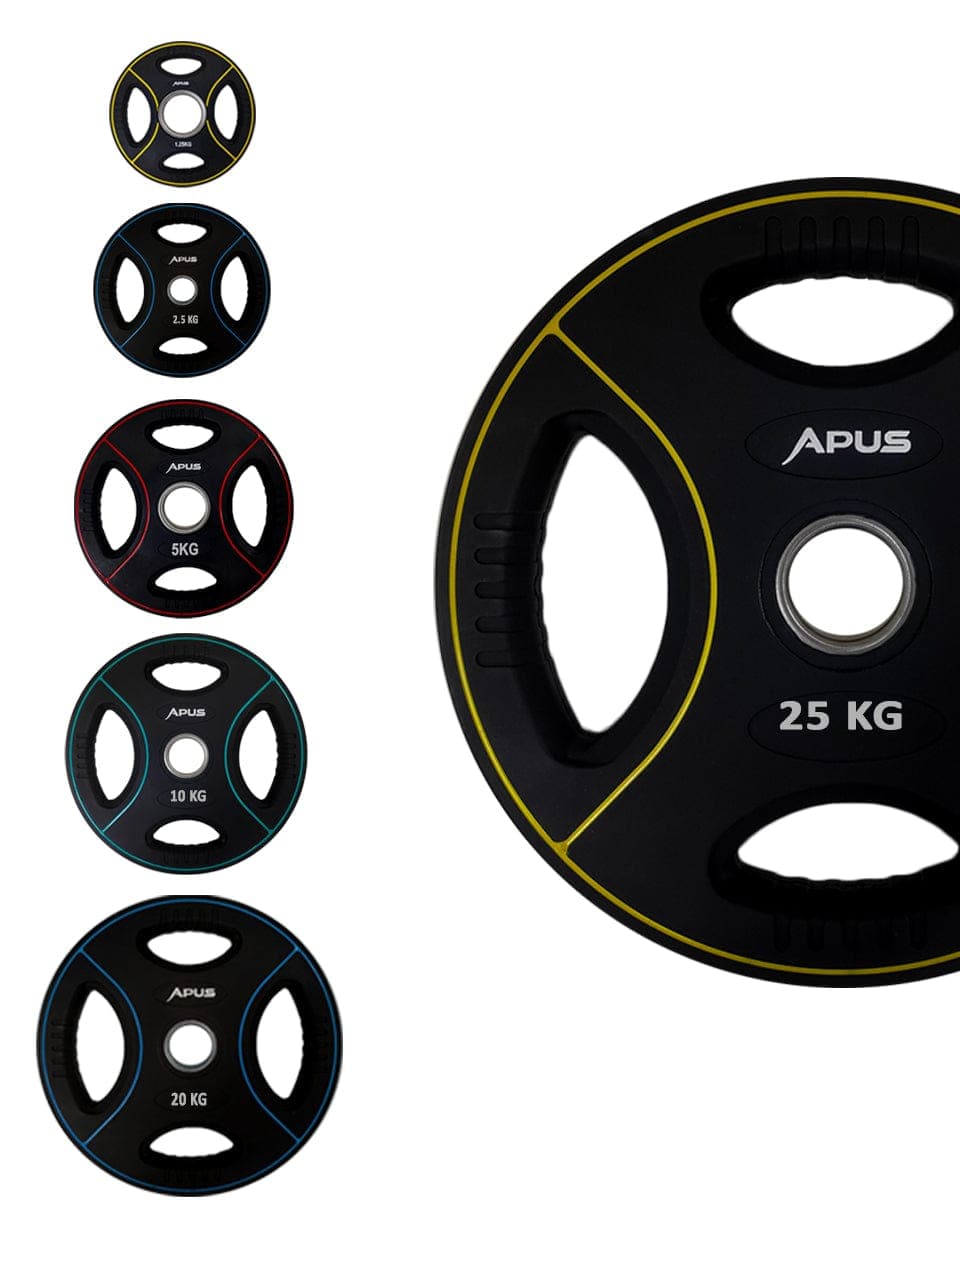 Apus Premium Olympic Rubber Weight Plates (1.25 to 25 KG) - With 3 years commercial warranty - Athletix.ae